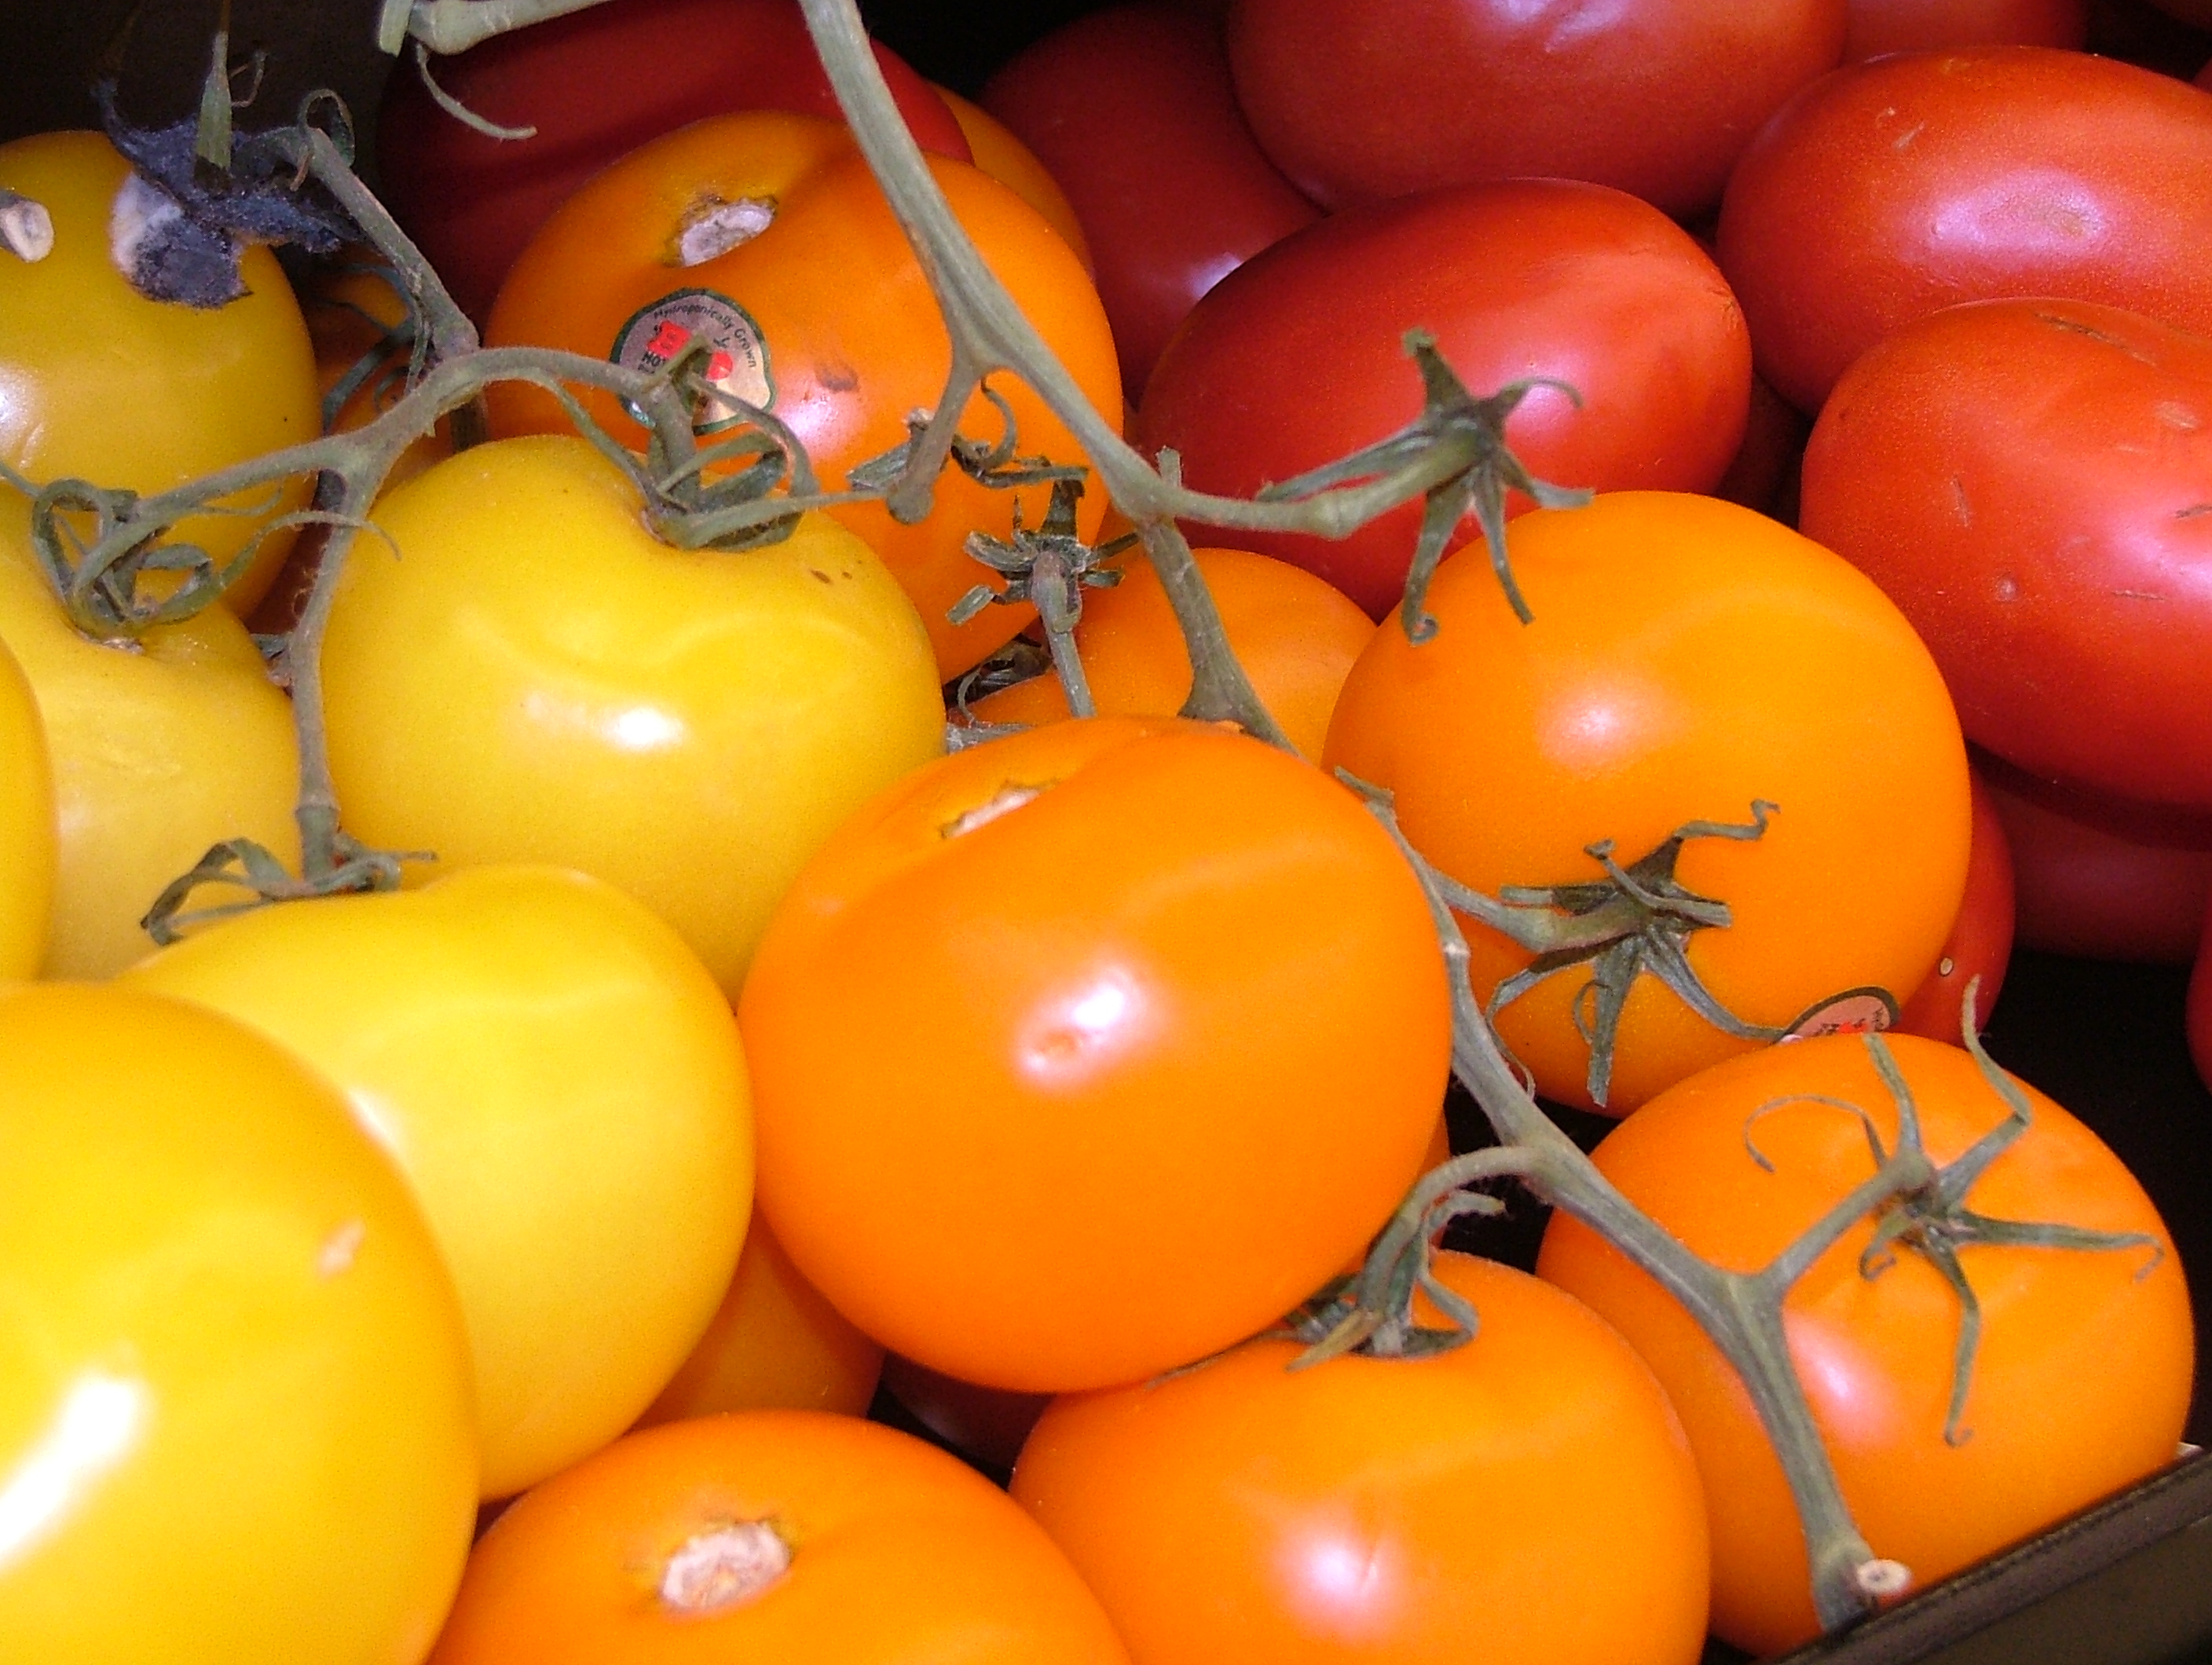 Colorful Red and Yellow Tomatoes 2816px